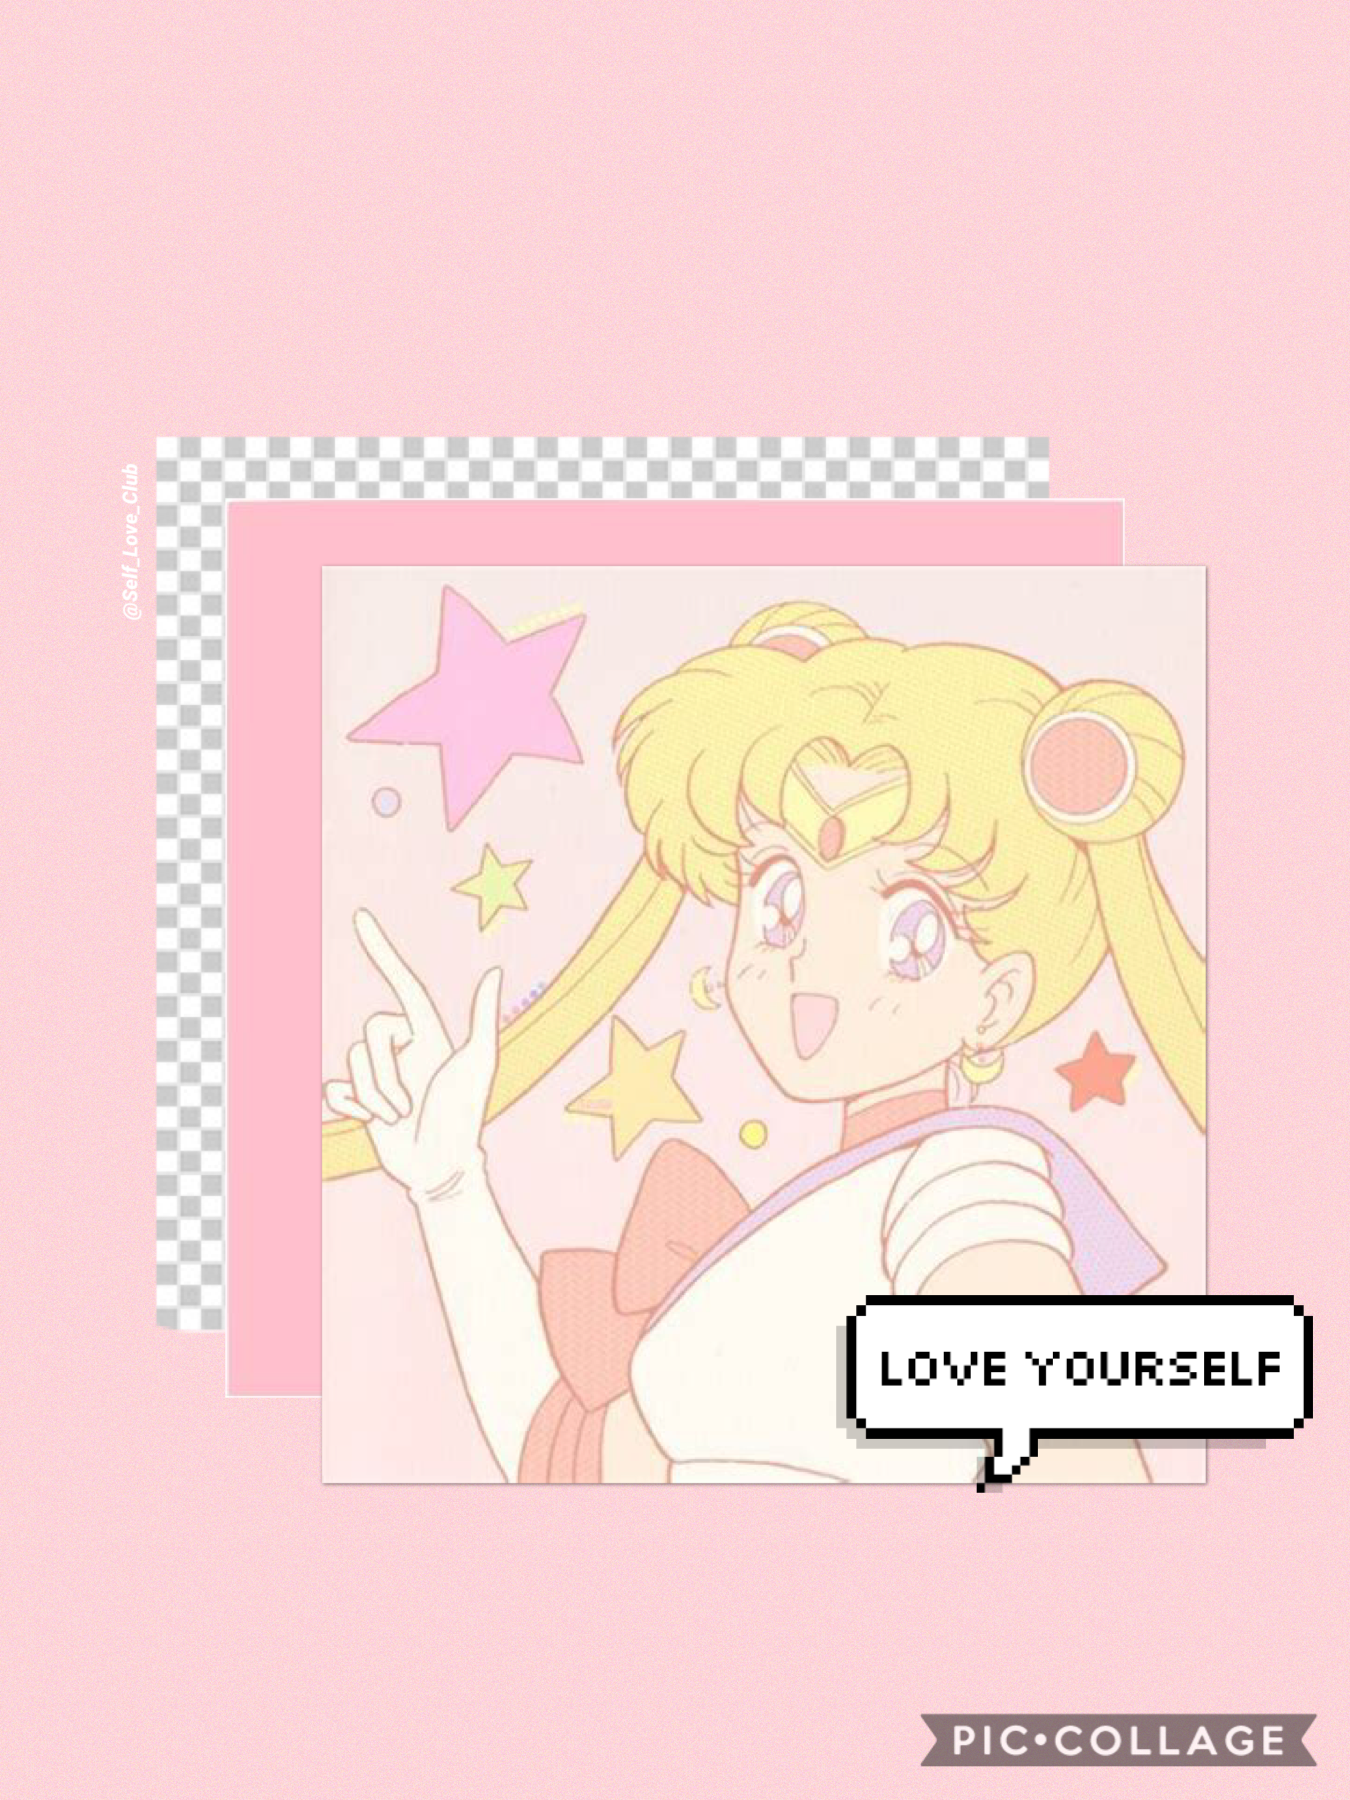 🌙 Tap 🌙
This took like 20 minutes to make but my other collages take like 10 not 20 ;-; 
I’ll post the original one that I found online in the remixes so ya 
QOTD: who’s your favorite character from Sailor moon 🌙
AOTD: mine is sailor her self! 
❤️🌙❤️🌙
